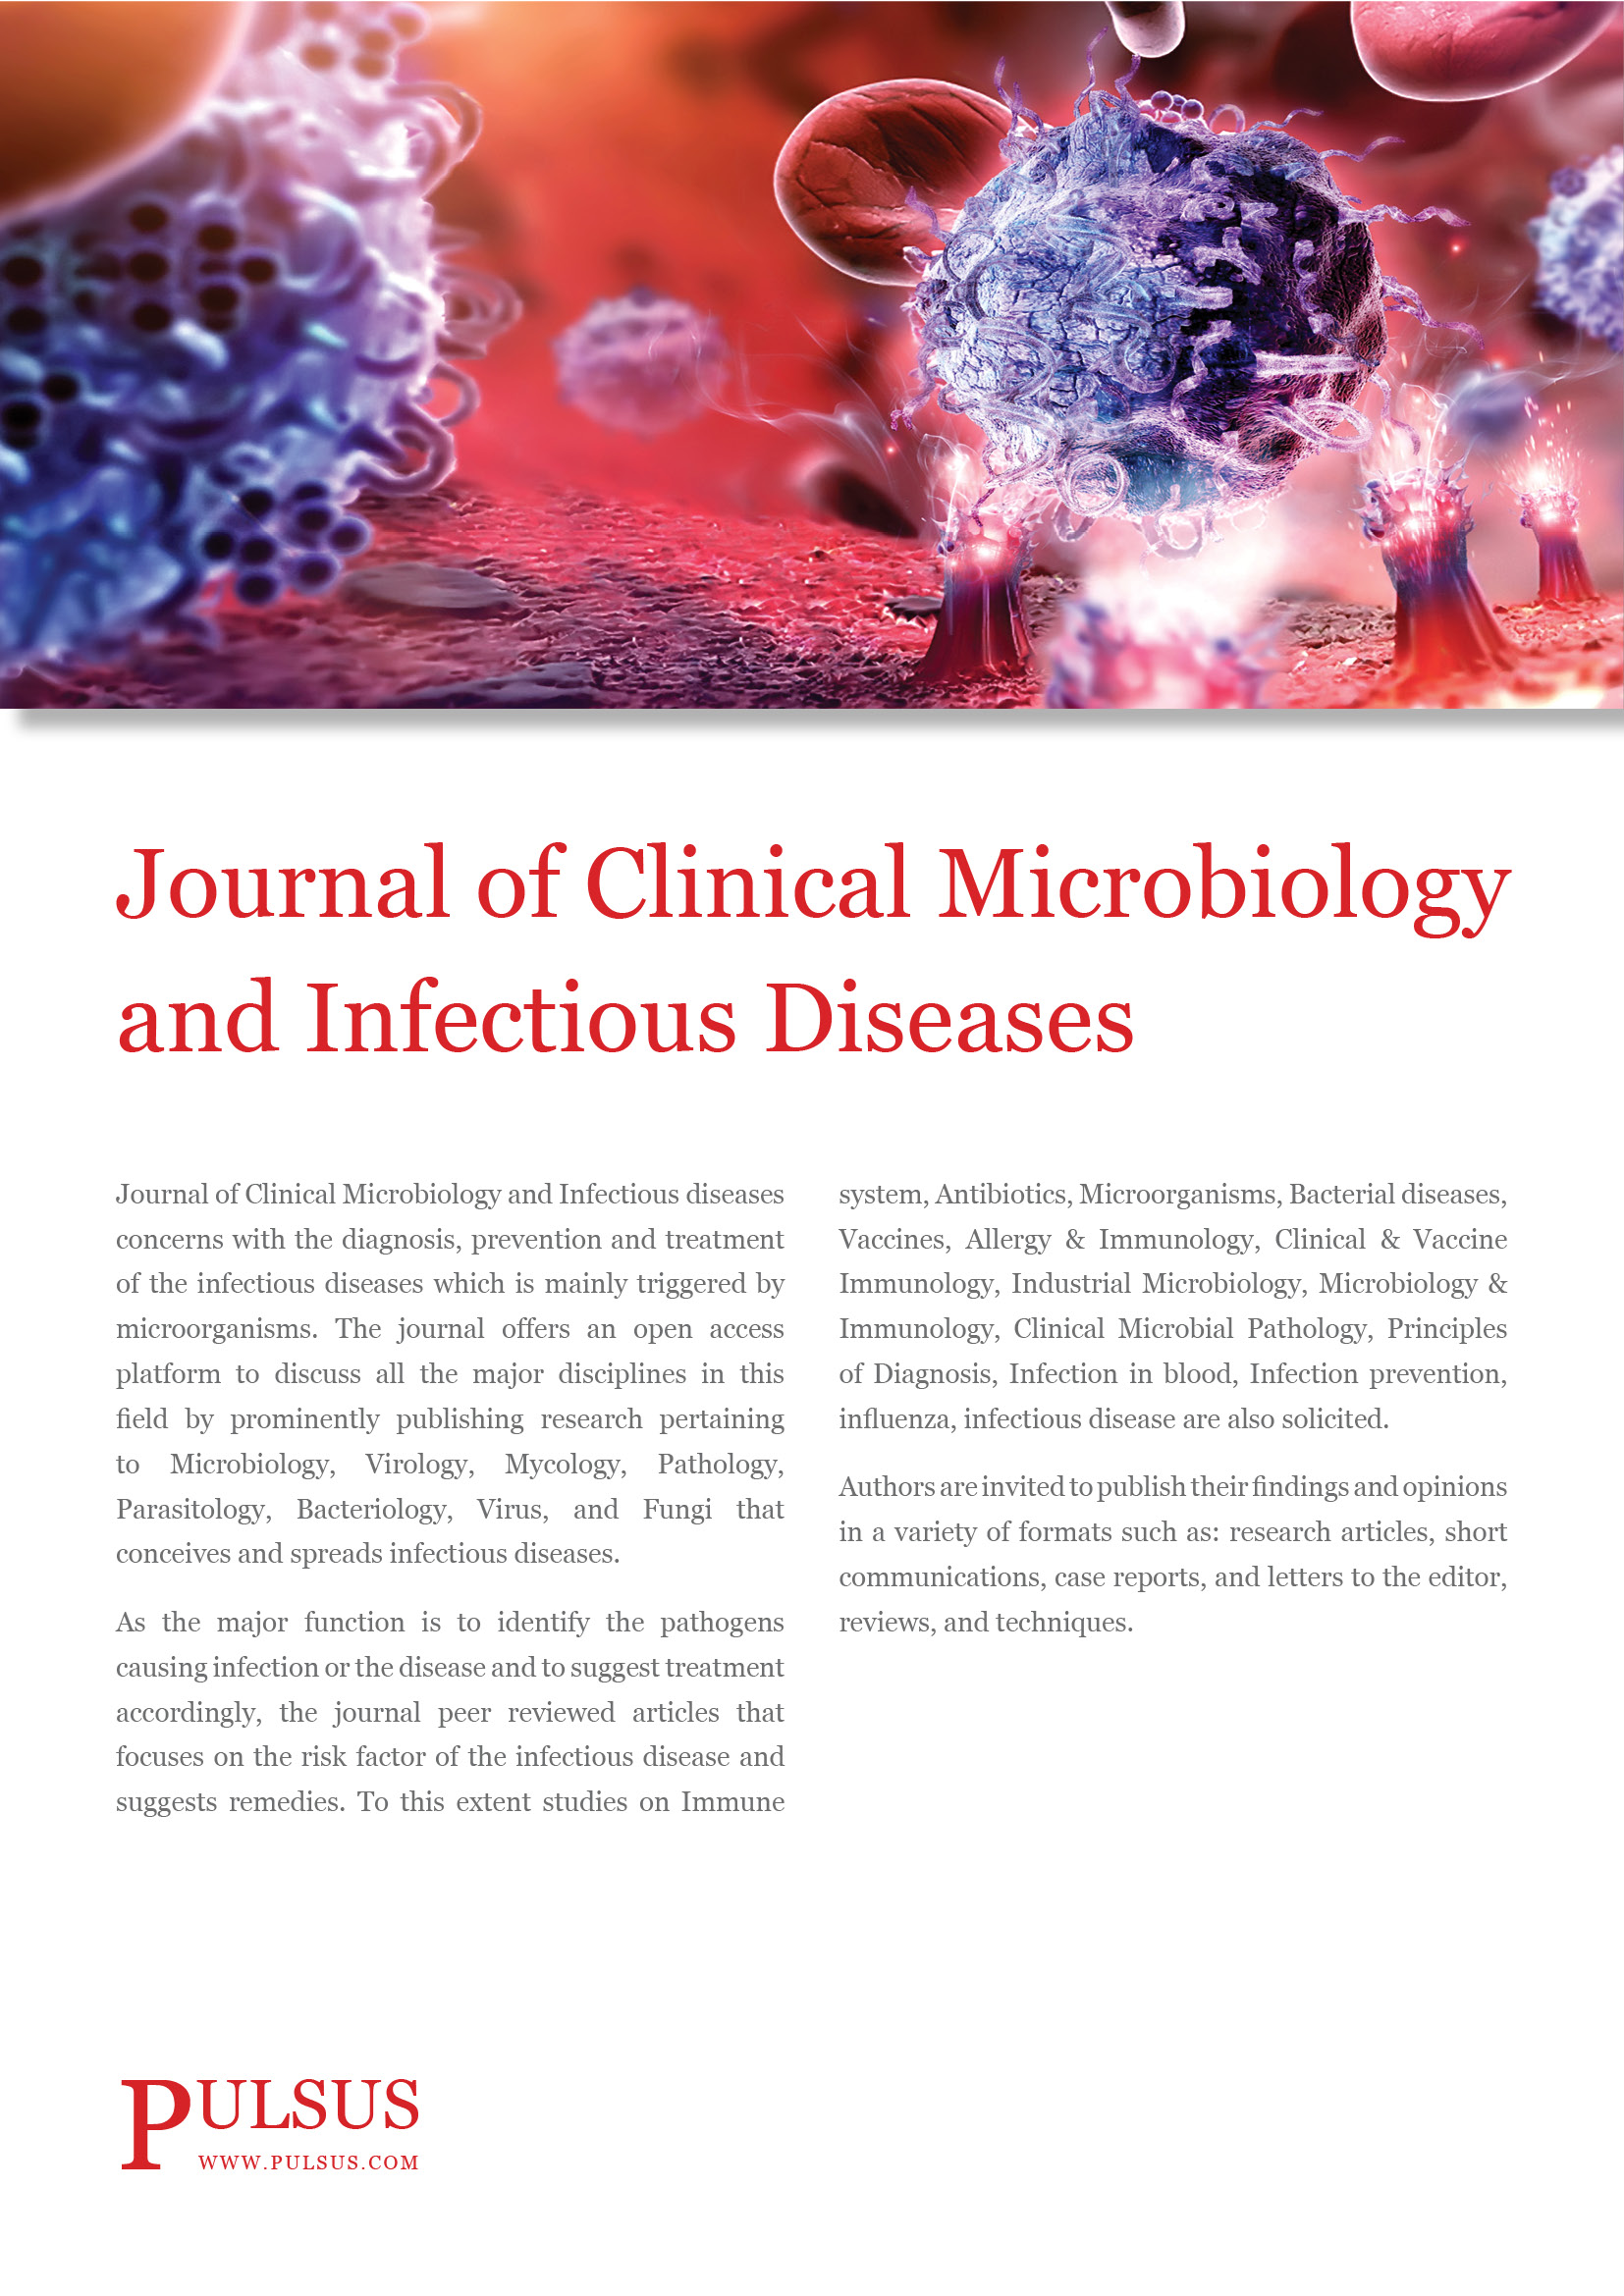 Journal of Clinical Microbiology and Infectious Diseases